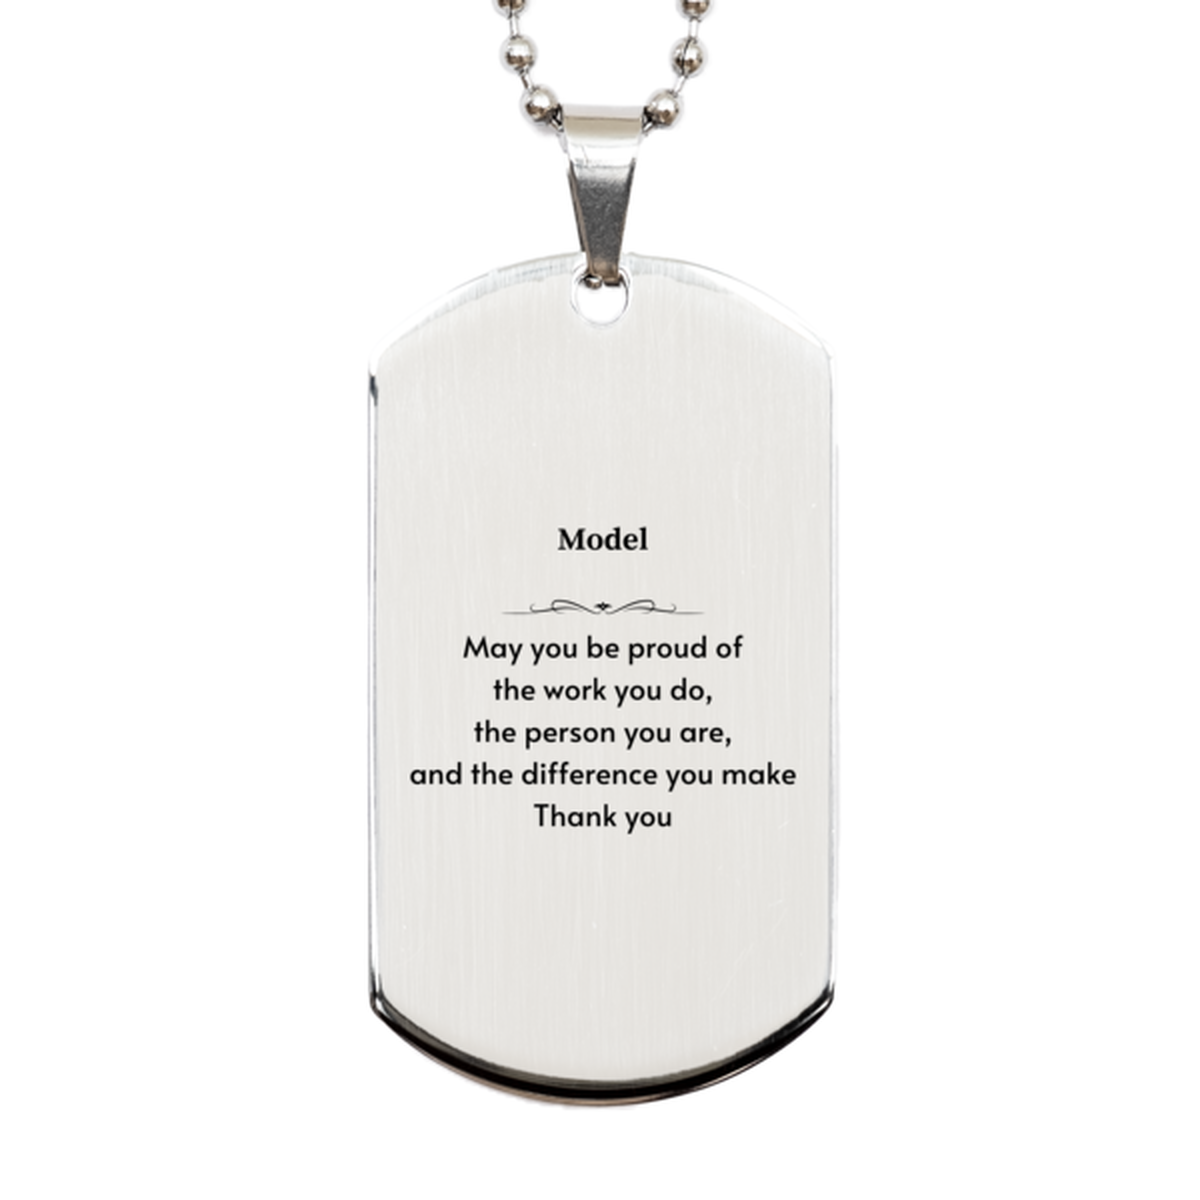 Heartwarming Silver Dog Tag Retirement Coworkers Gifts for Model, Model May You be proud of the work you do, the person you are Gifts for Boss Men Women Friends